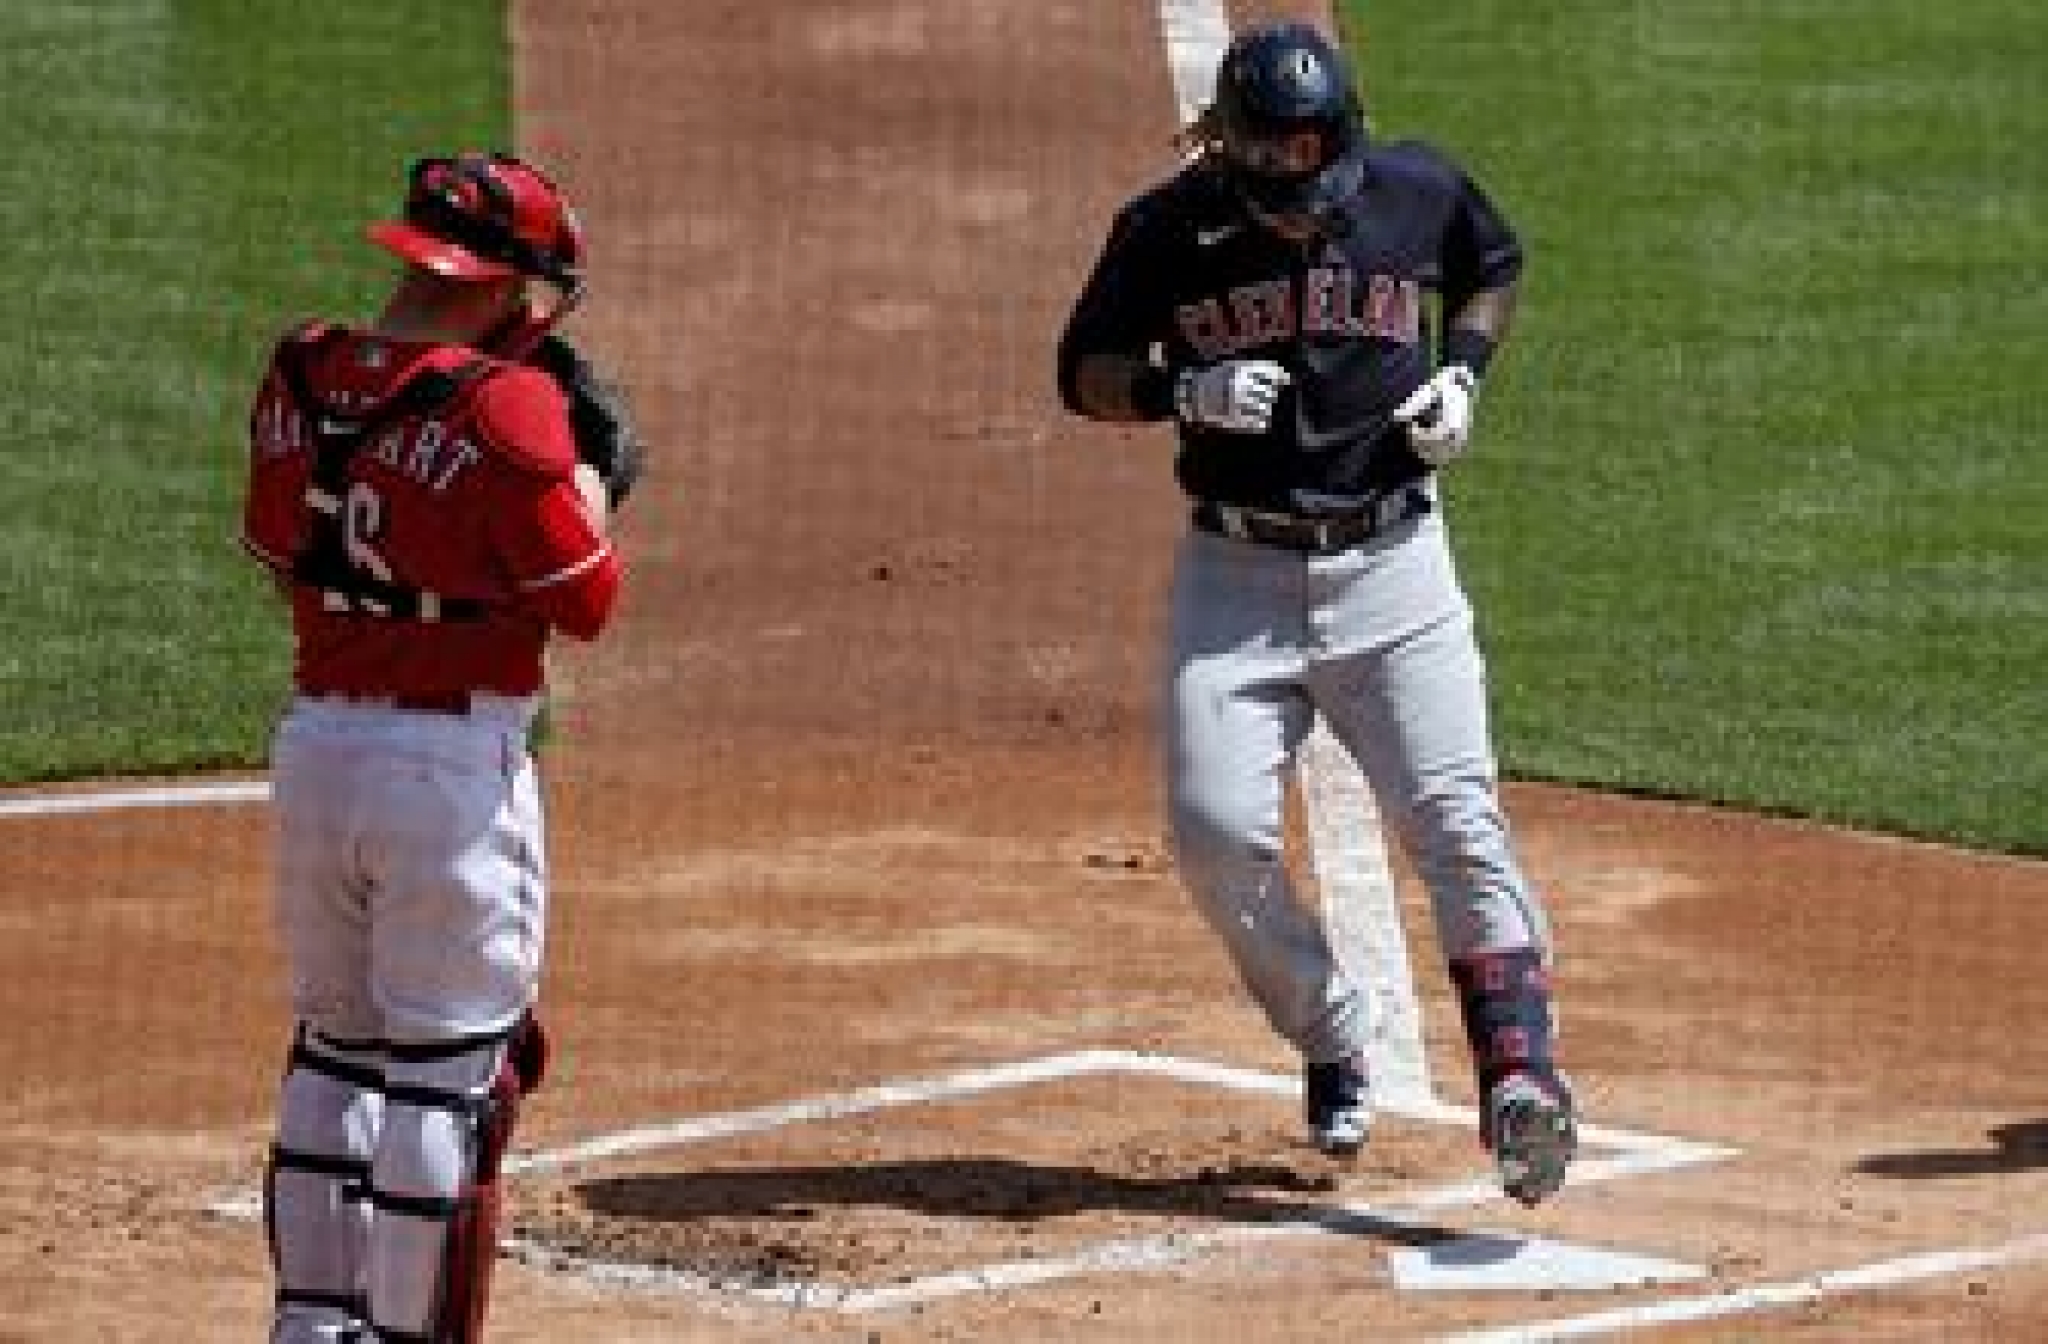 Indians club three homers to get by Reds, 6-3